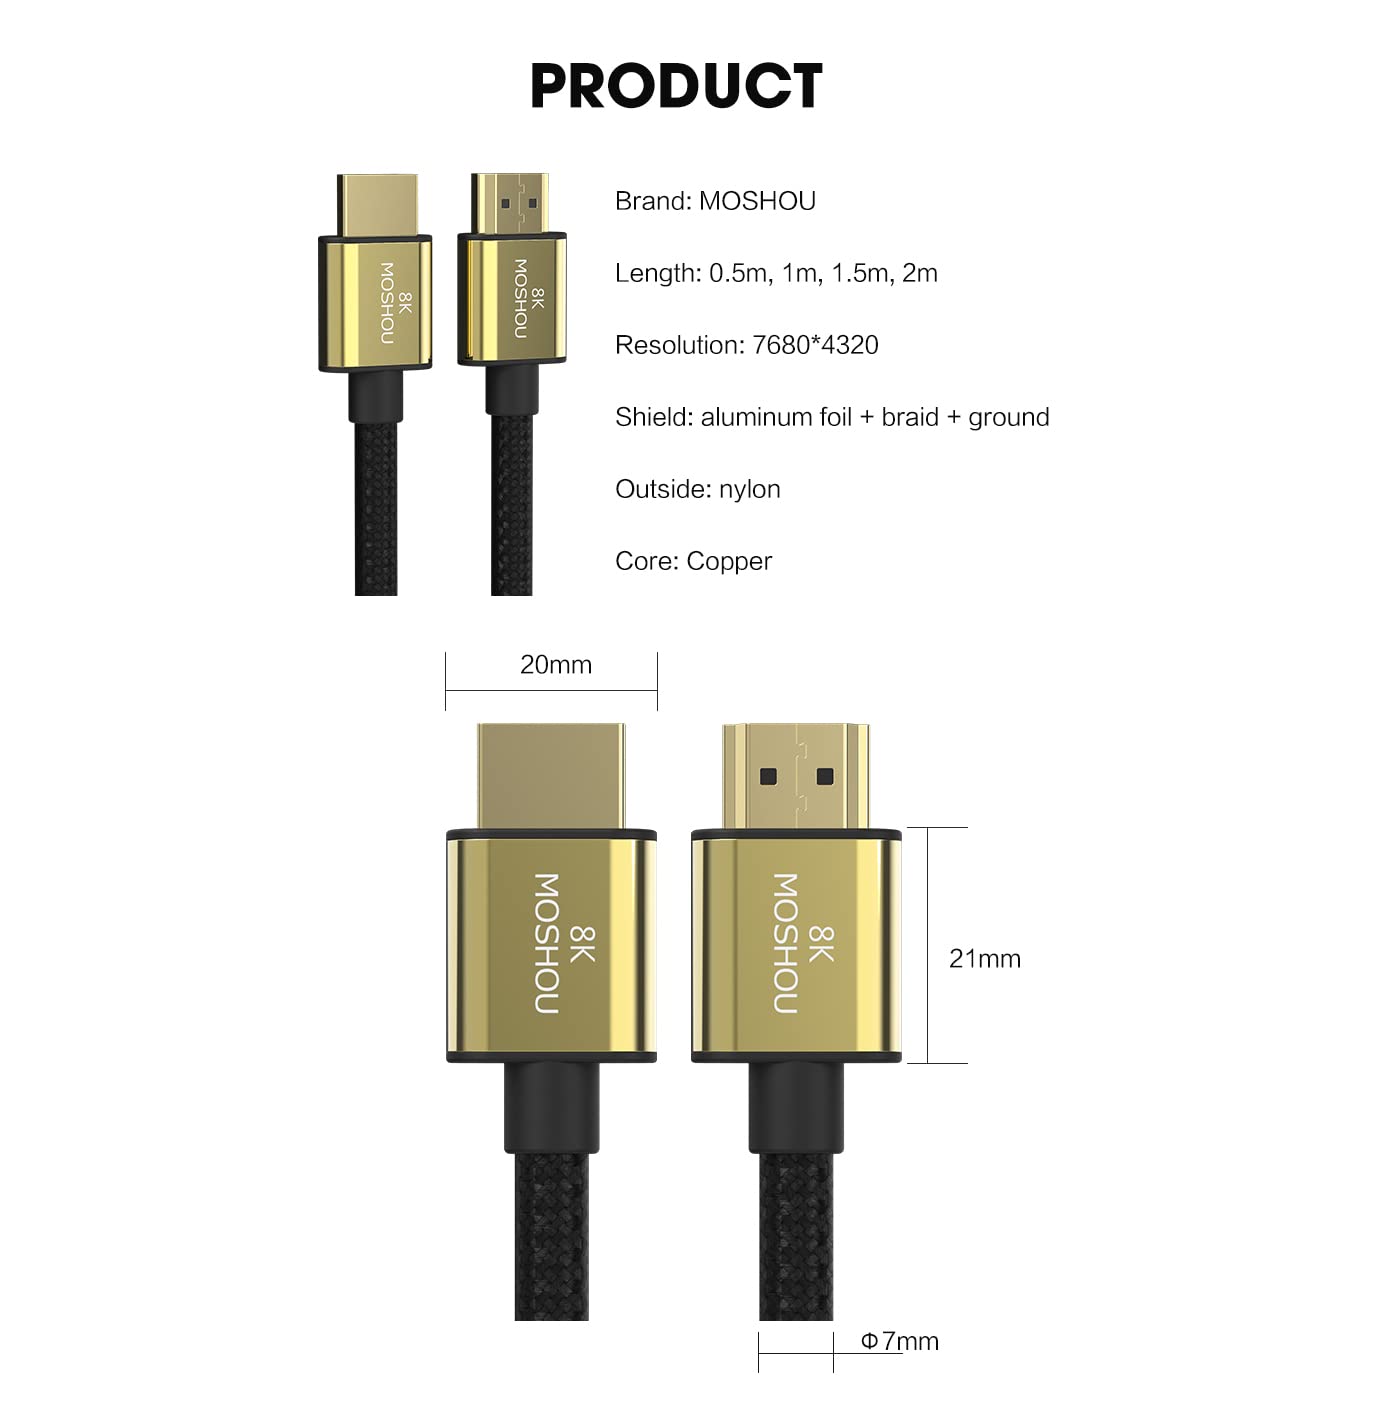 HDMI Cable 2.1 4K@120Hz Certification 48Gbps 1.5 Feet,Ultra High Speed 8K HDMI Cable Nylon Gold-plated interface Supports 1440p 144hz HDMI,8K@60Hz,ALLM,VRR,HDR,eARC,DTS,For PS5,XBox,RTX3090(1.5 Feet)